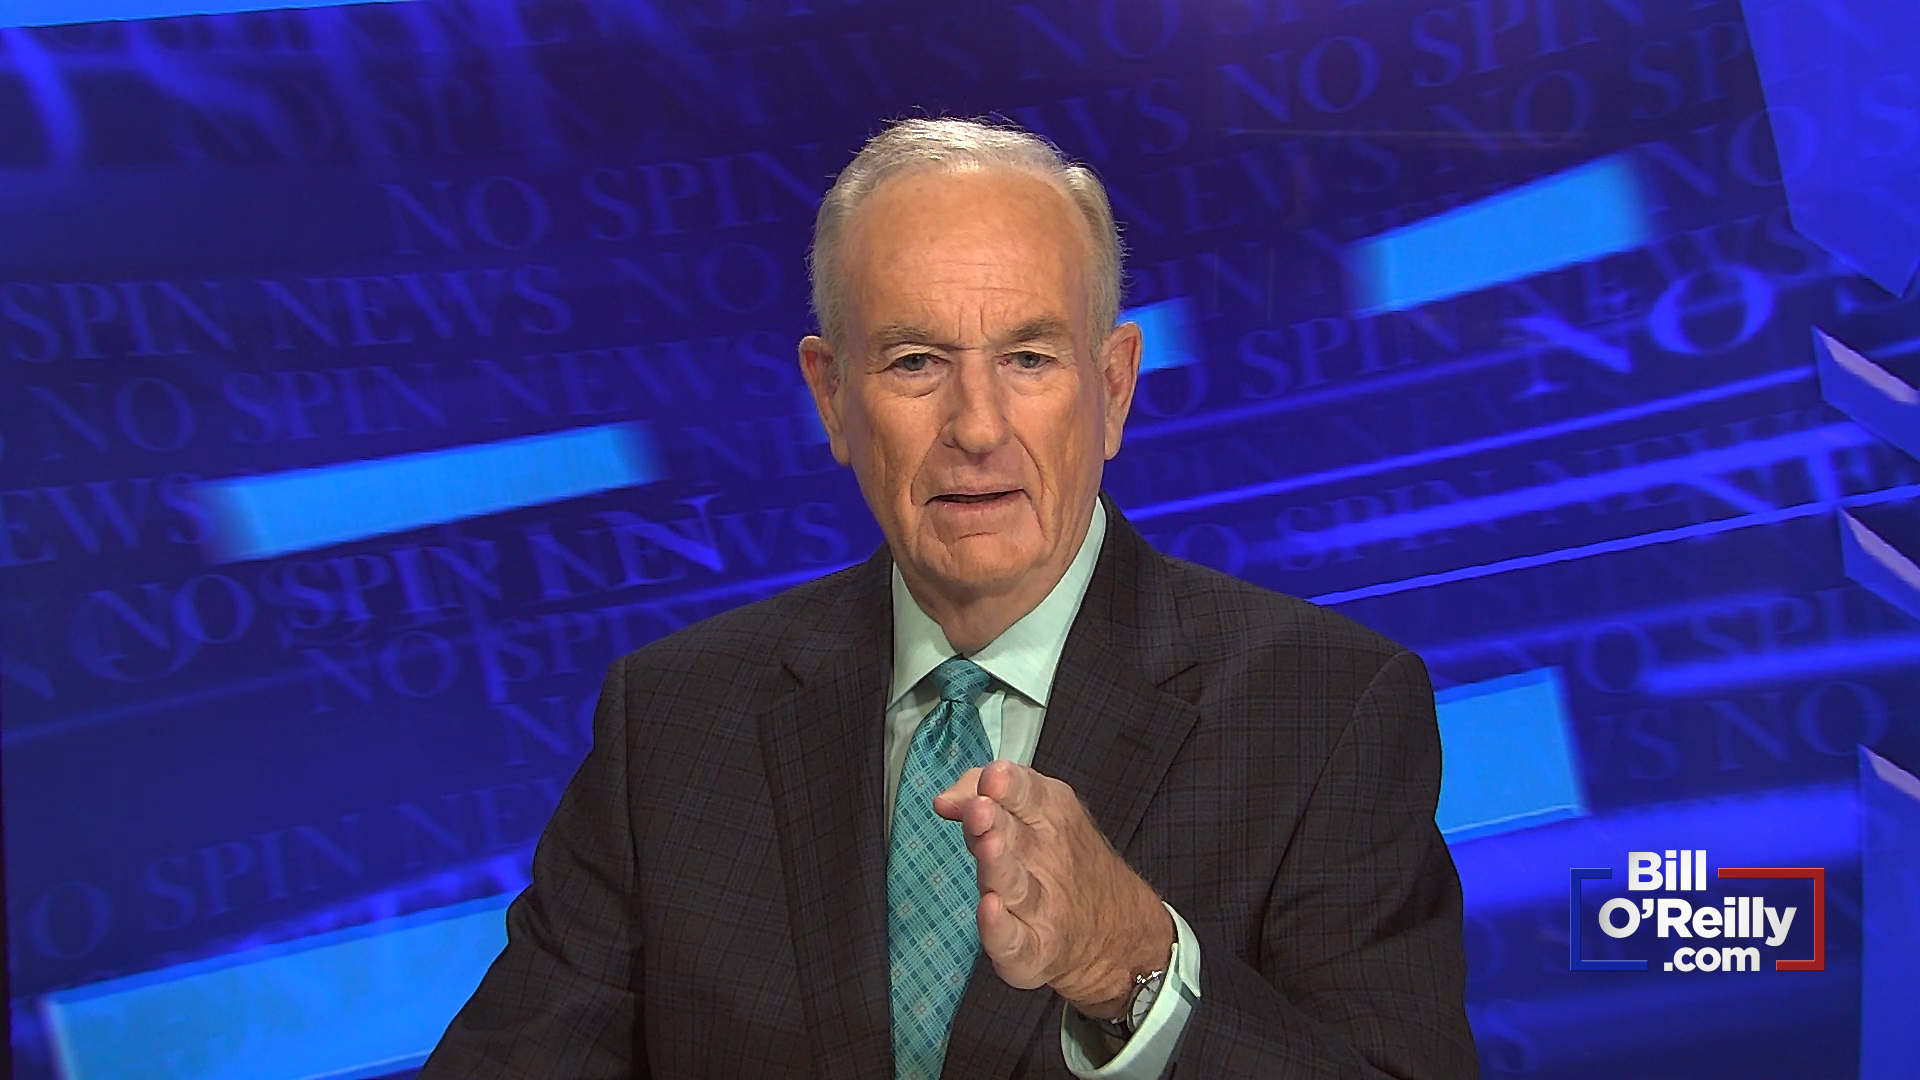 O'Reilly on Biden: What's He Talking About?